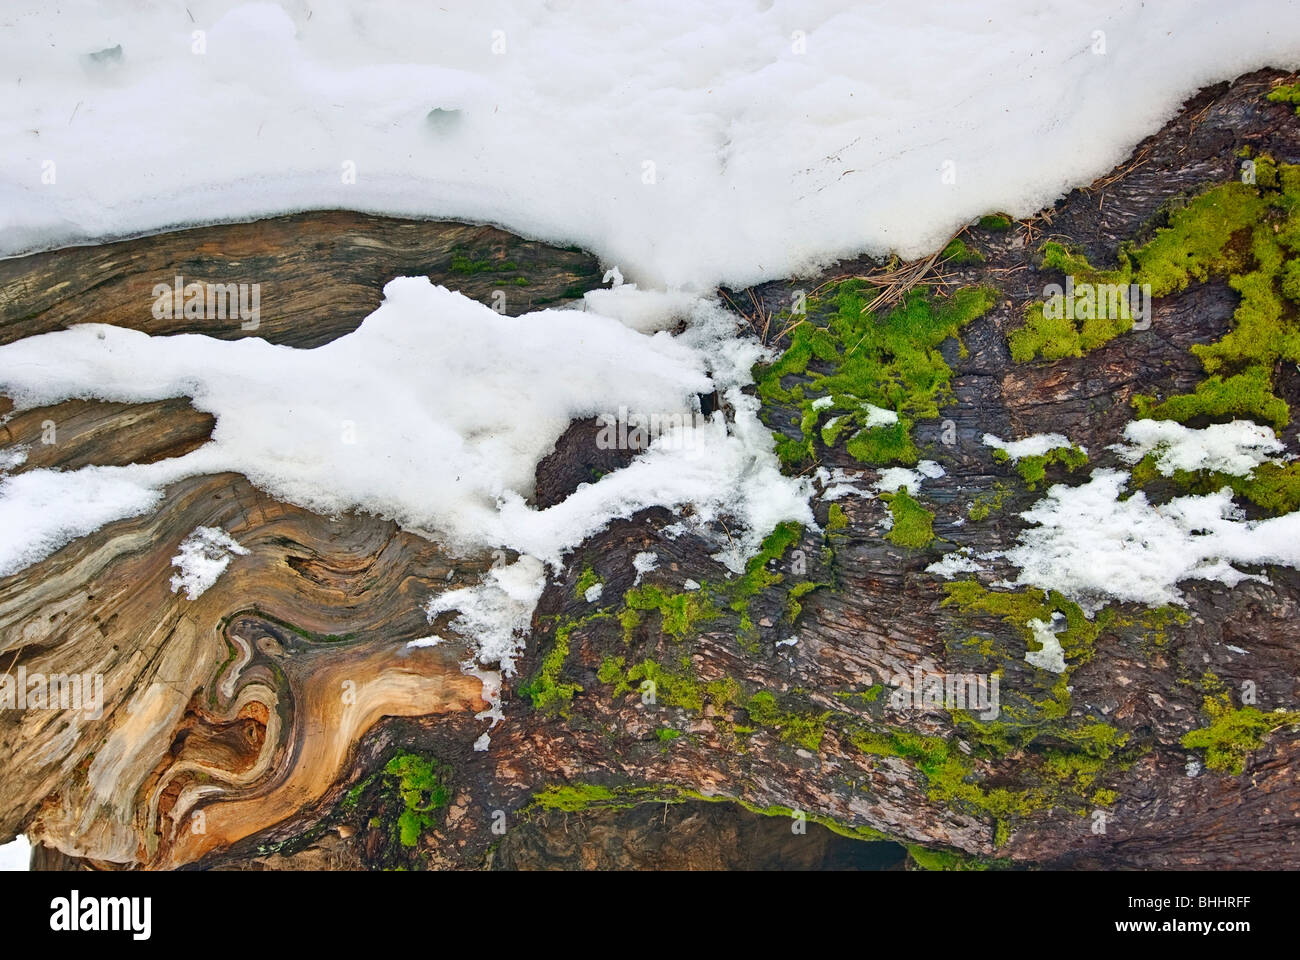 Close up of a giant Sequoia Trees of Tuolumne Grove in Yosemite National Park with moss and snow. Stock Photo